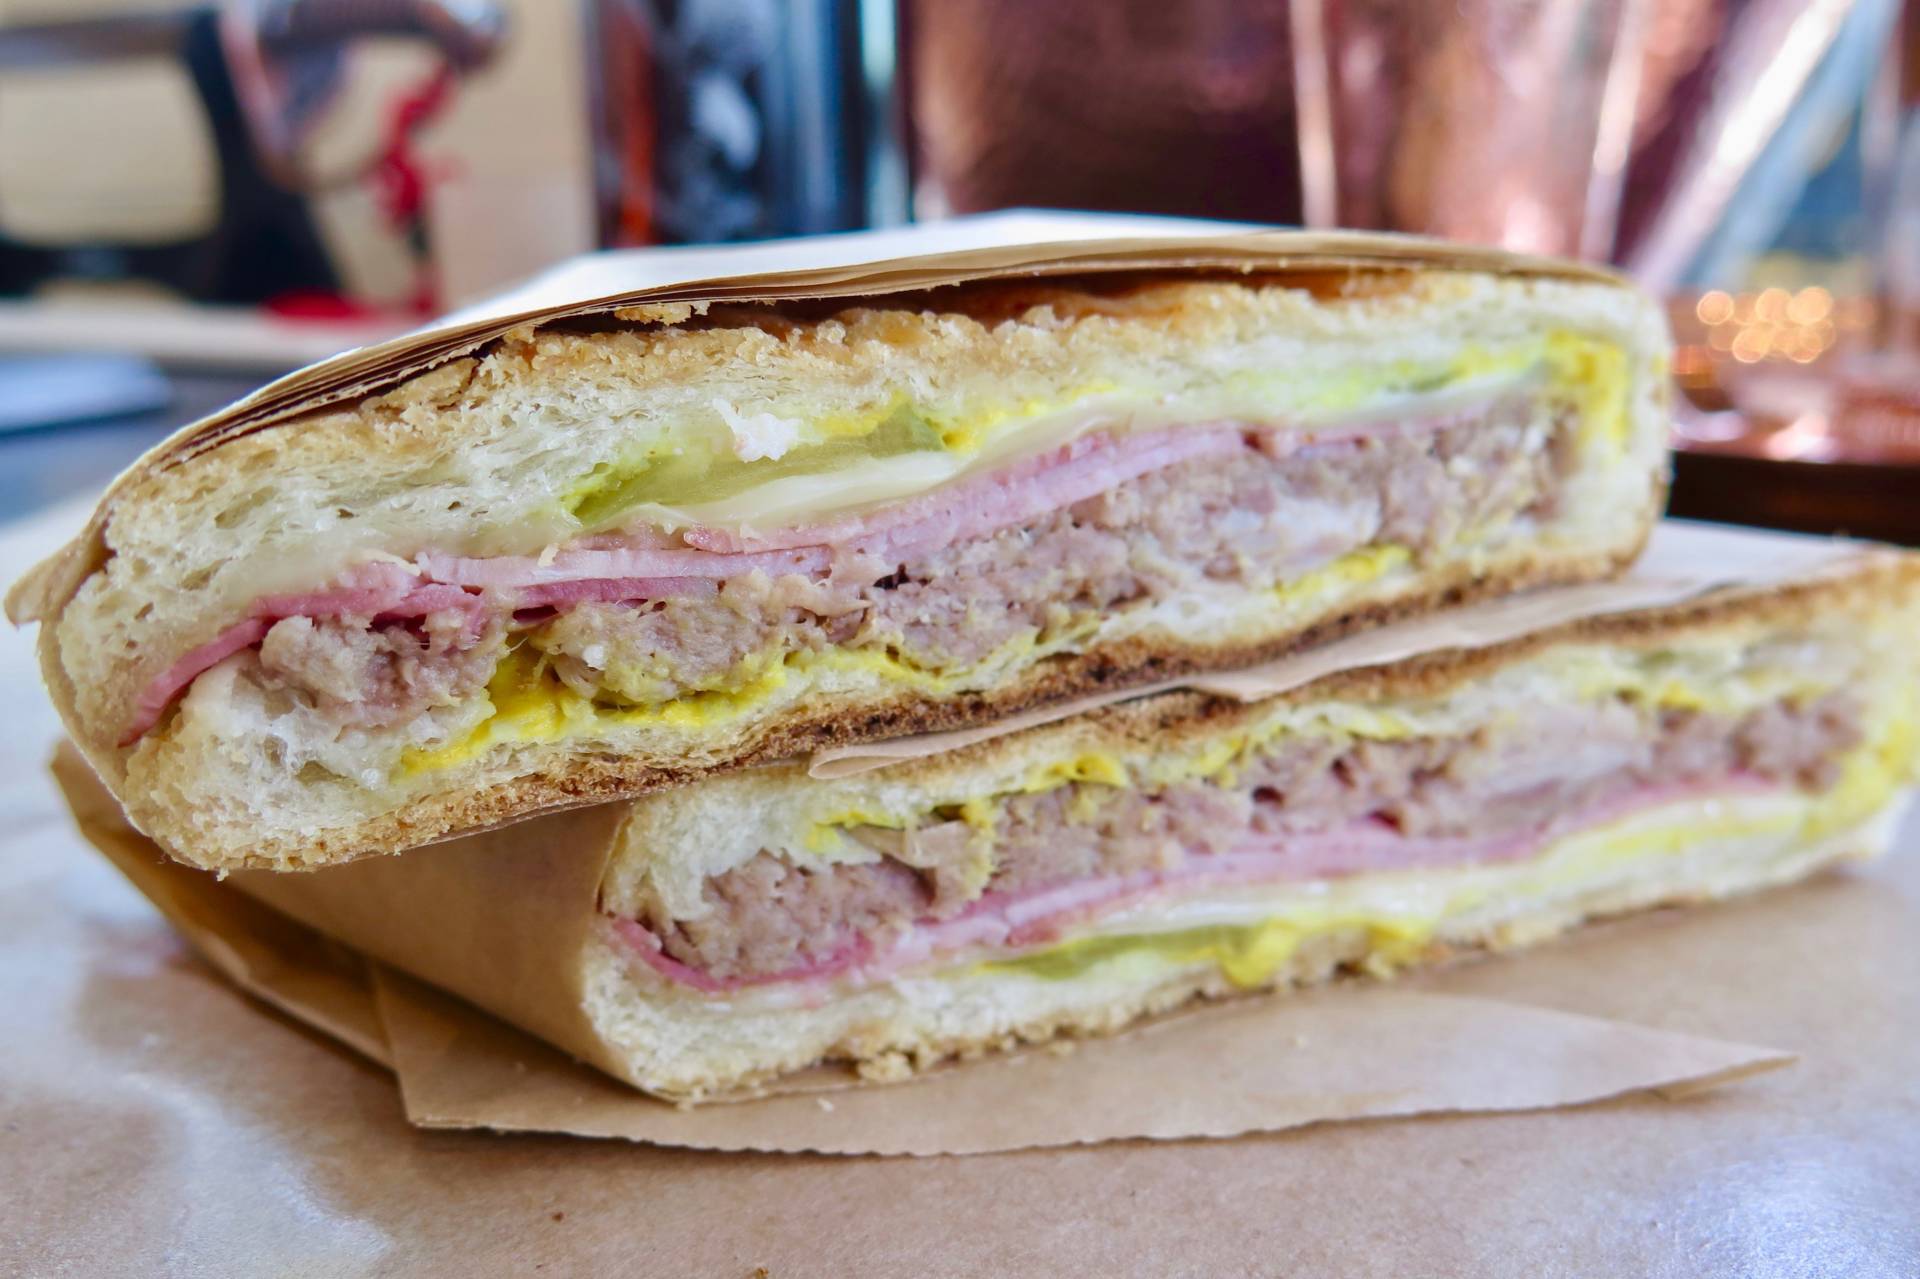 Find a tasty Cubano at Avedano’s Deli at Maison Corbeaux.